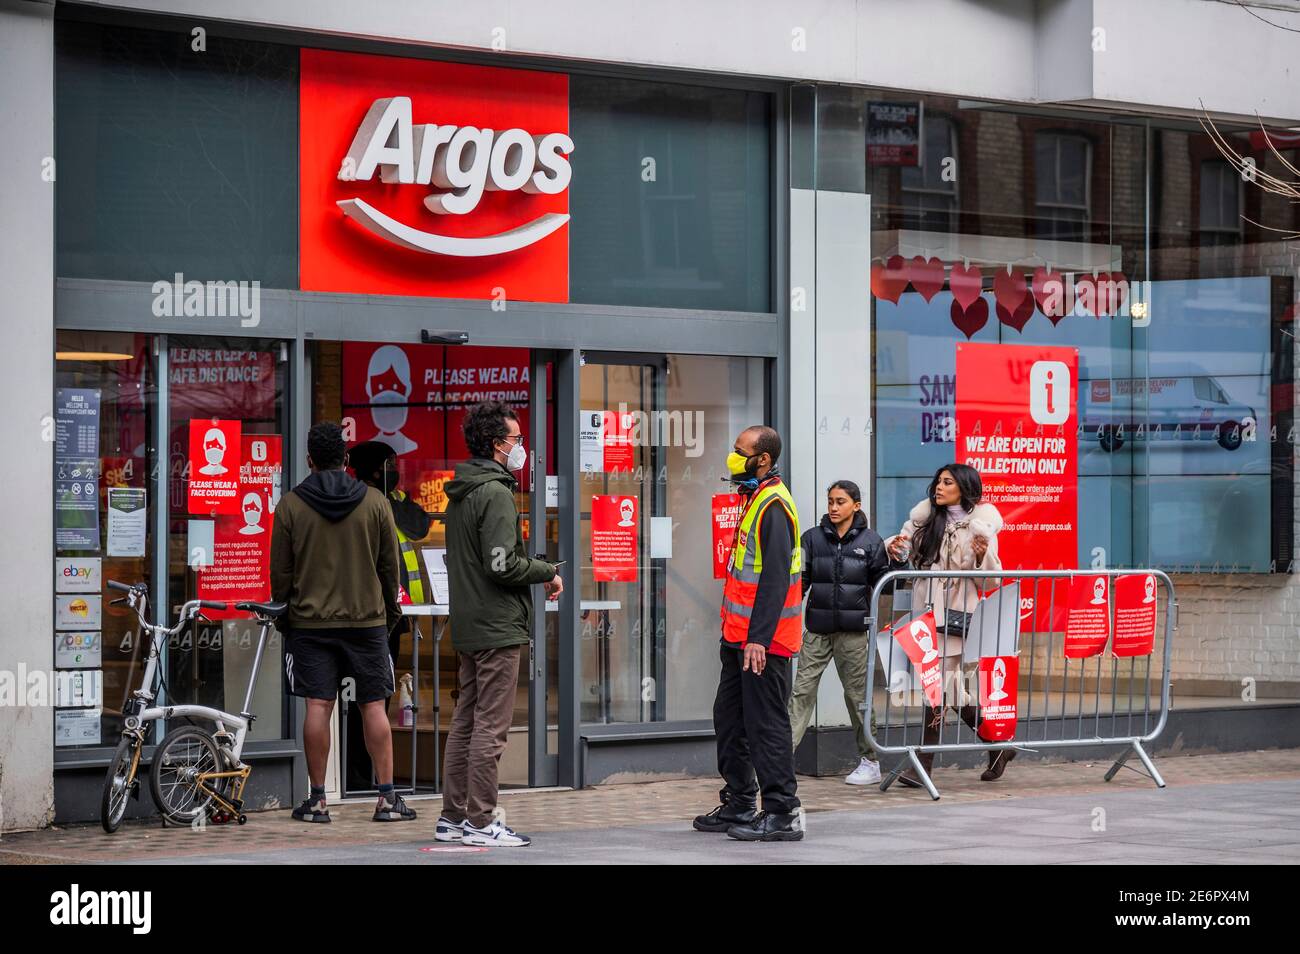 London, UK. 29th Jan, 2021. Argos is still offering click and collect but most are shut - Many retail and leisure units have closed since the pandemic started. Difficult times for the high street during national Lockdown 3. The Government instruction is for everyone to stay at home to save the pressure on the NHS. Credit: Guy Bell/Alamy Live News Stock Photo